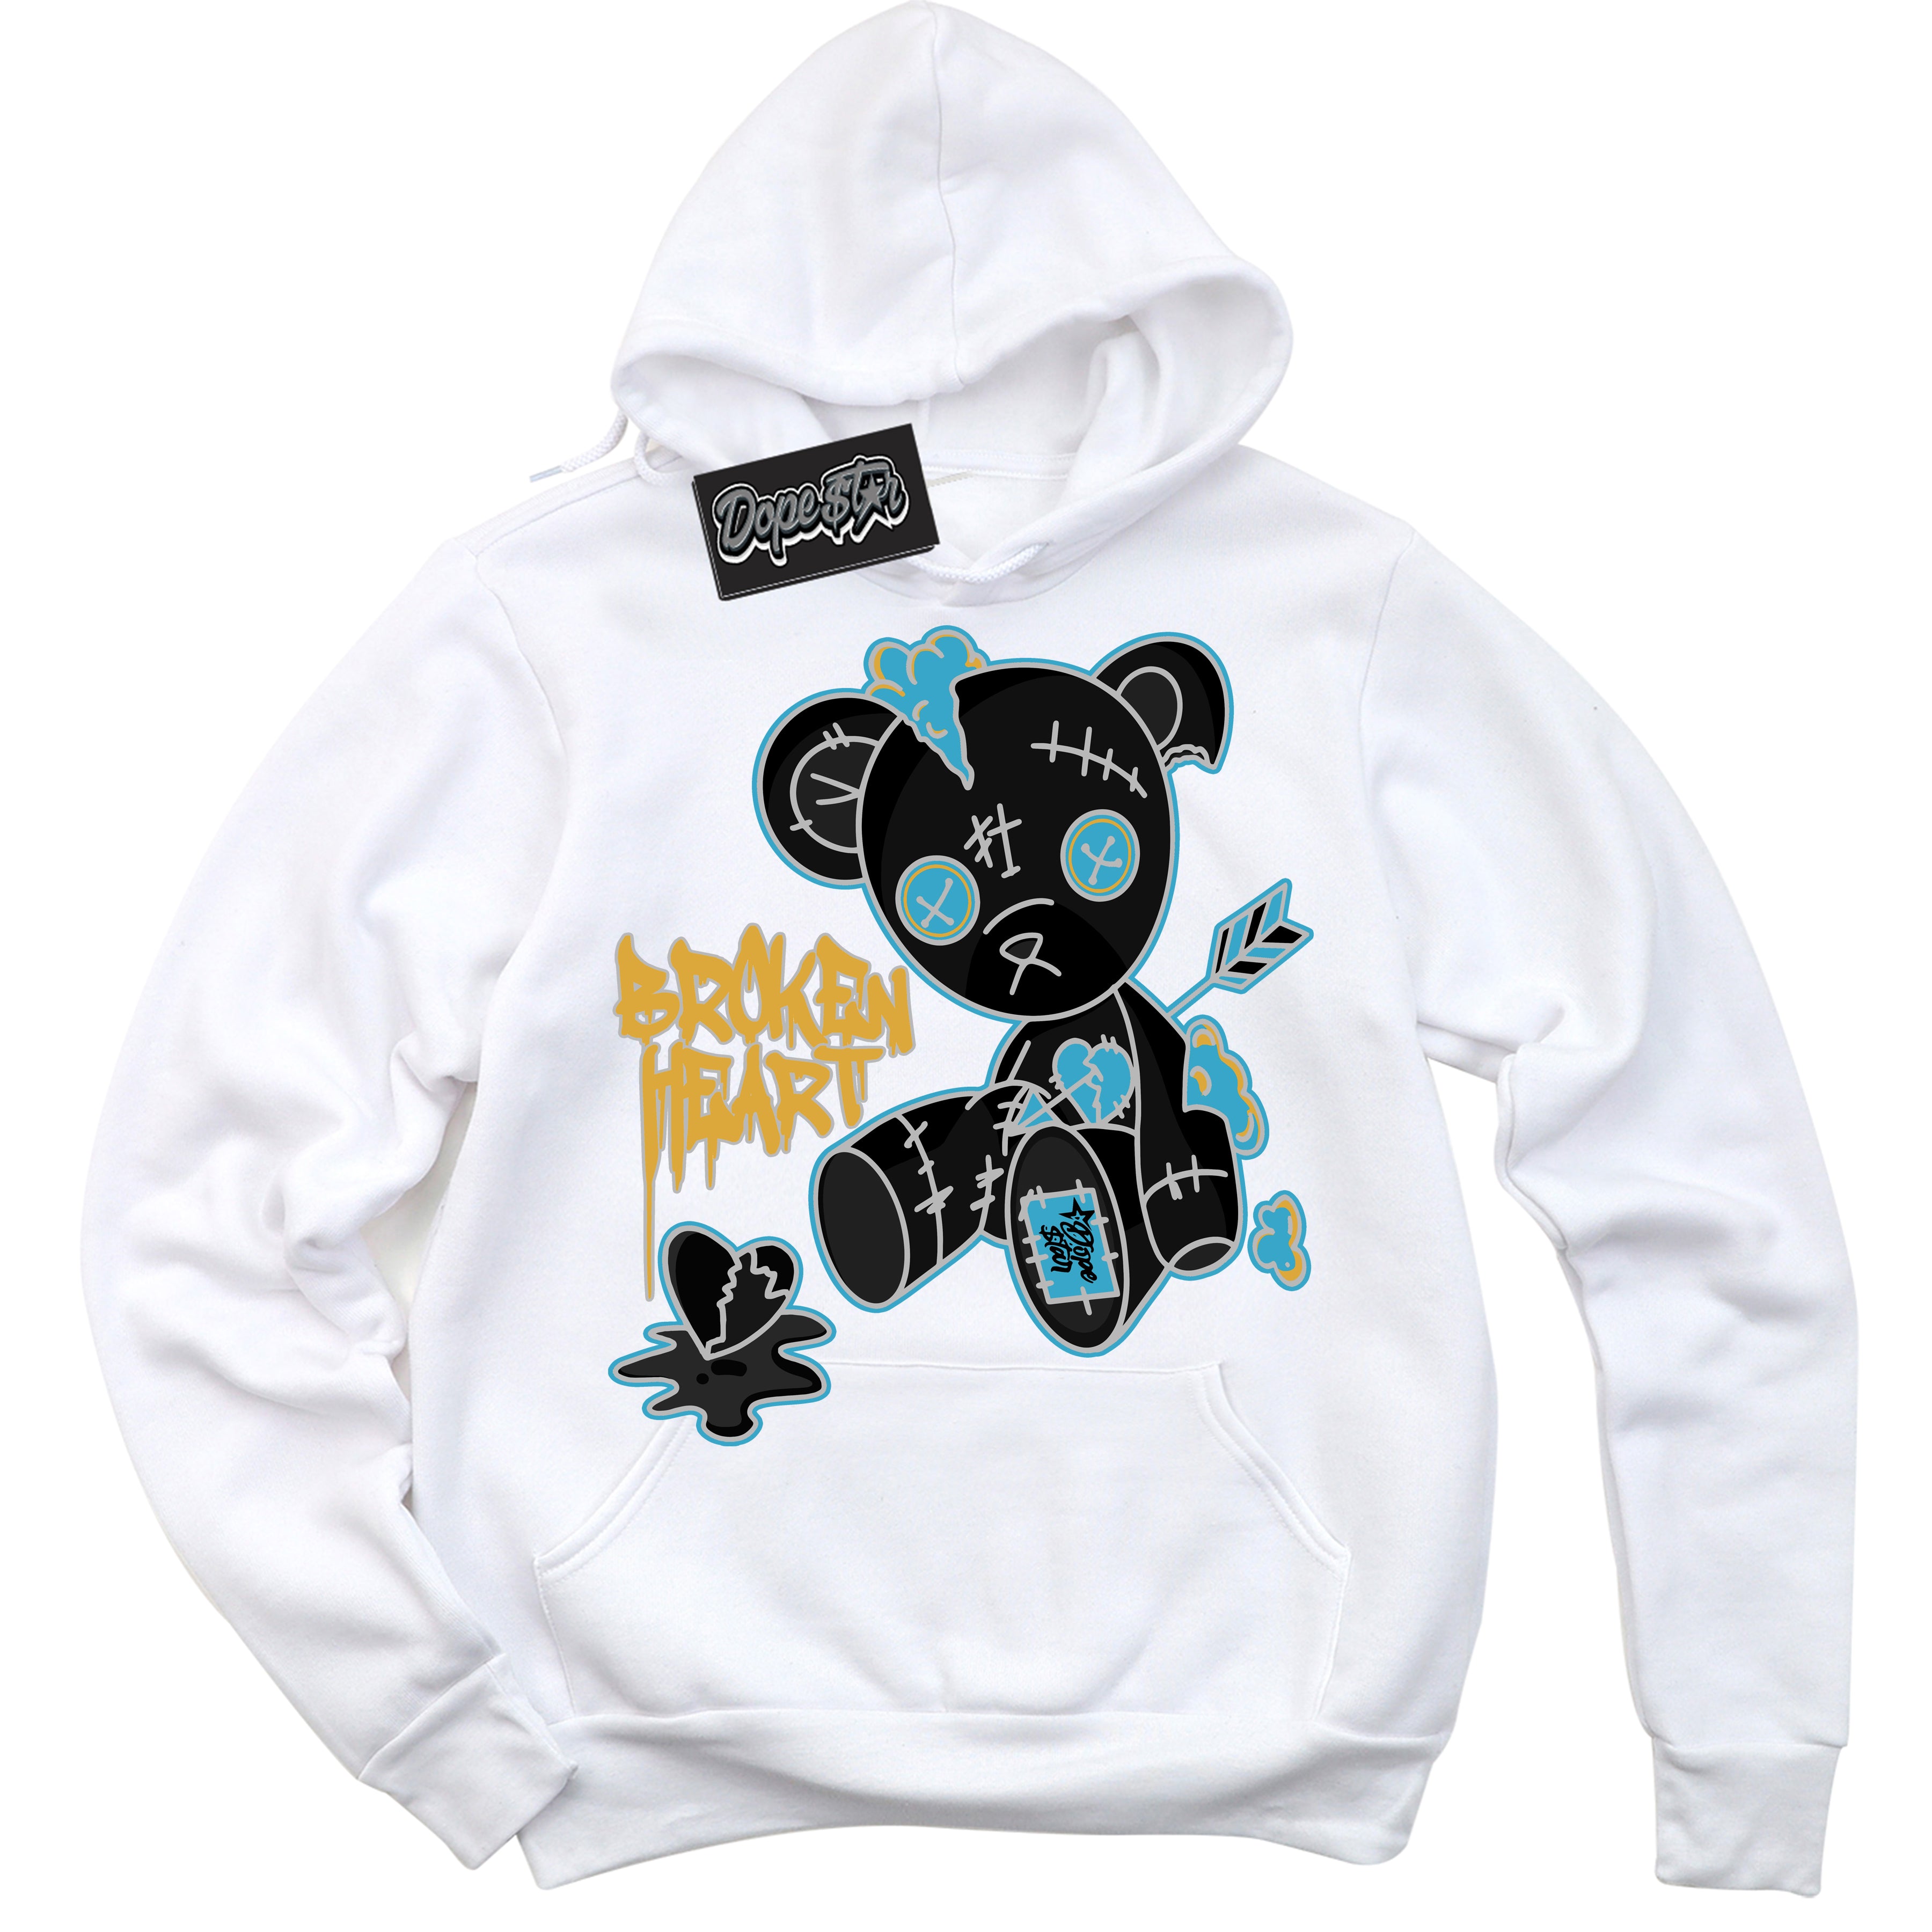 Cool White Hoodie with “ Broken Heart Bear ”  design that Perfectly Matches Aqua 5s Sneakers.